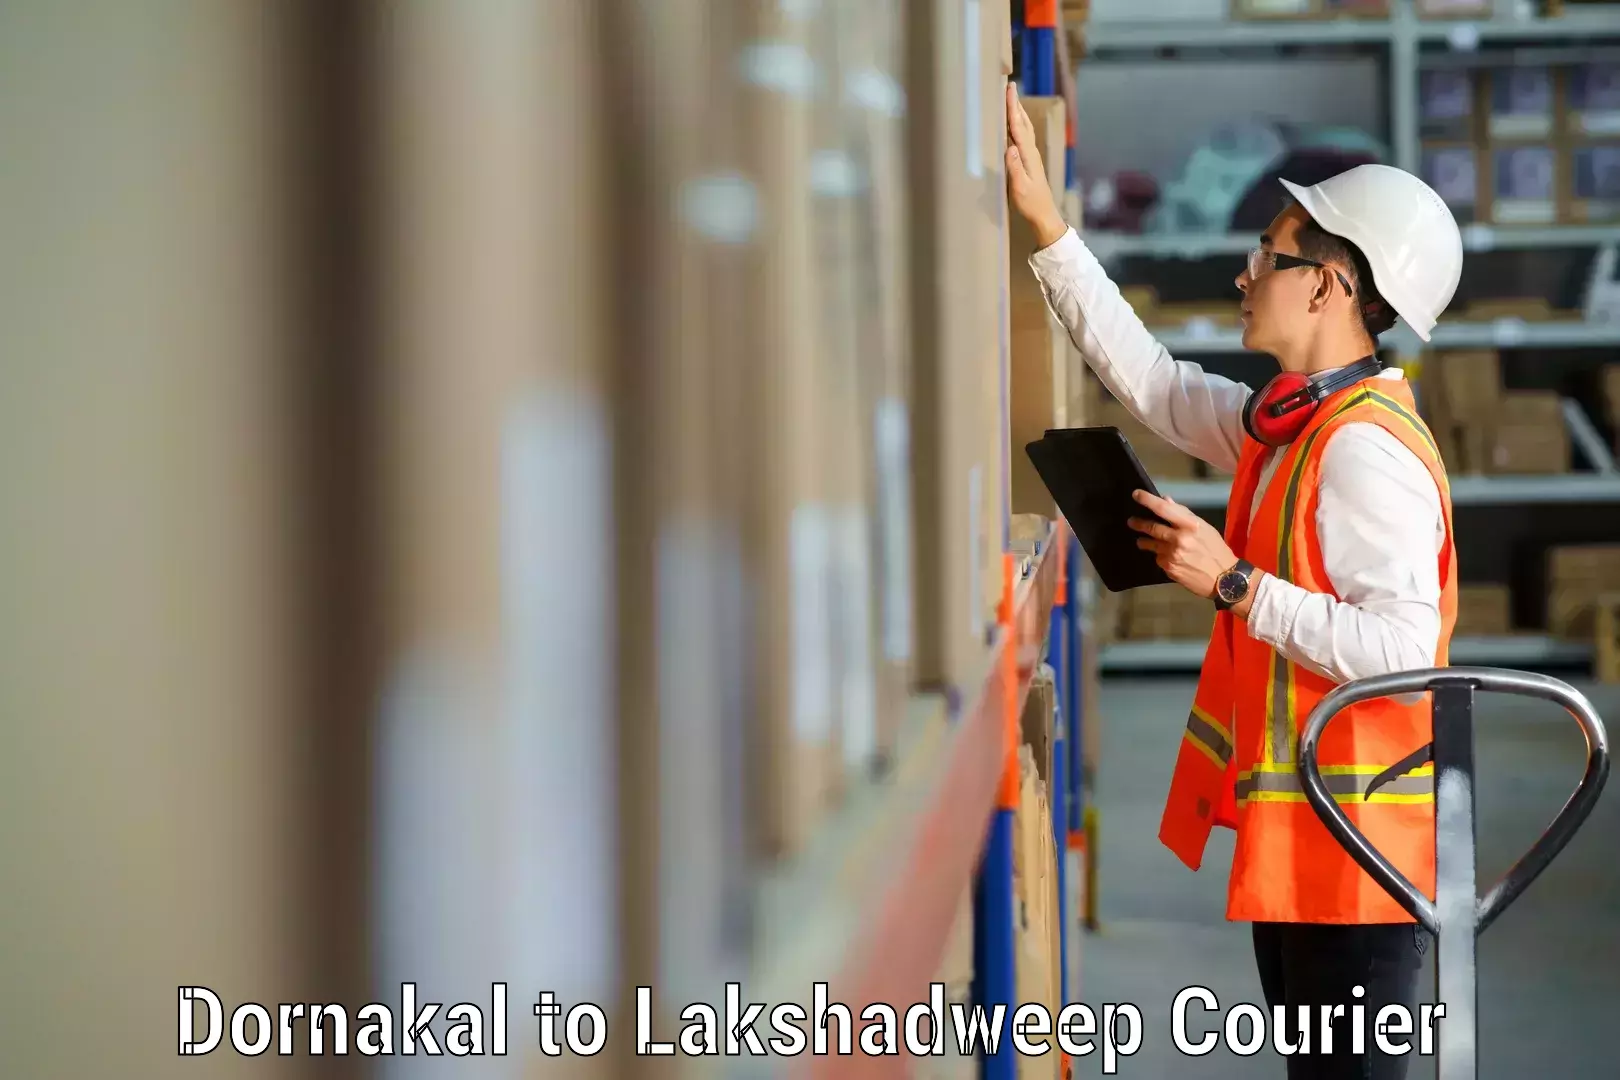 Efficient relocation services Dornakal to Lakshadweep